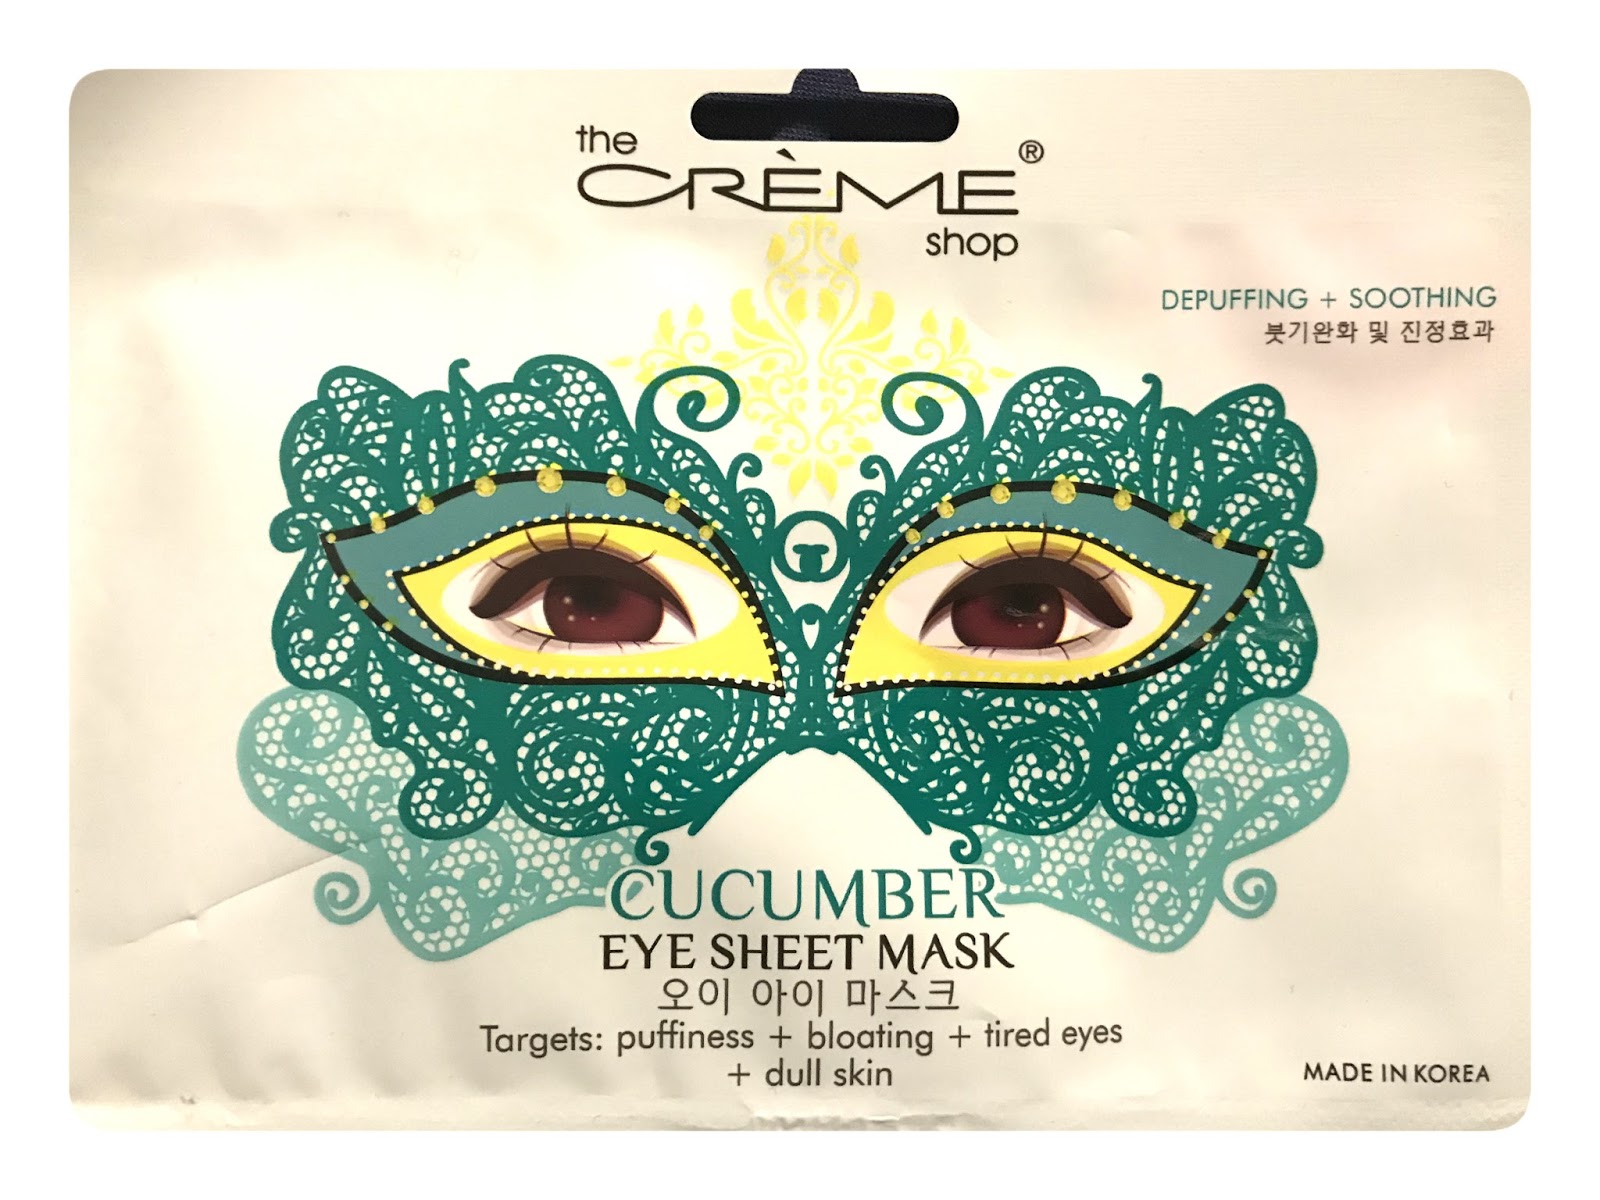 Cucumber Face Mask Review